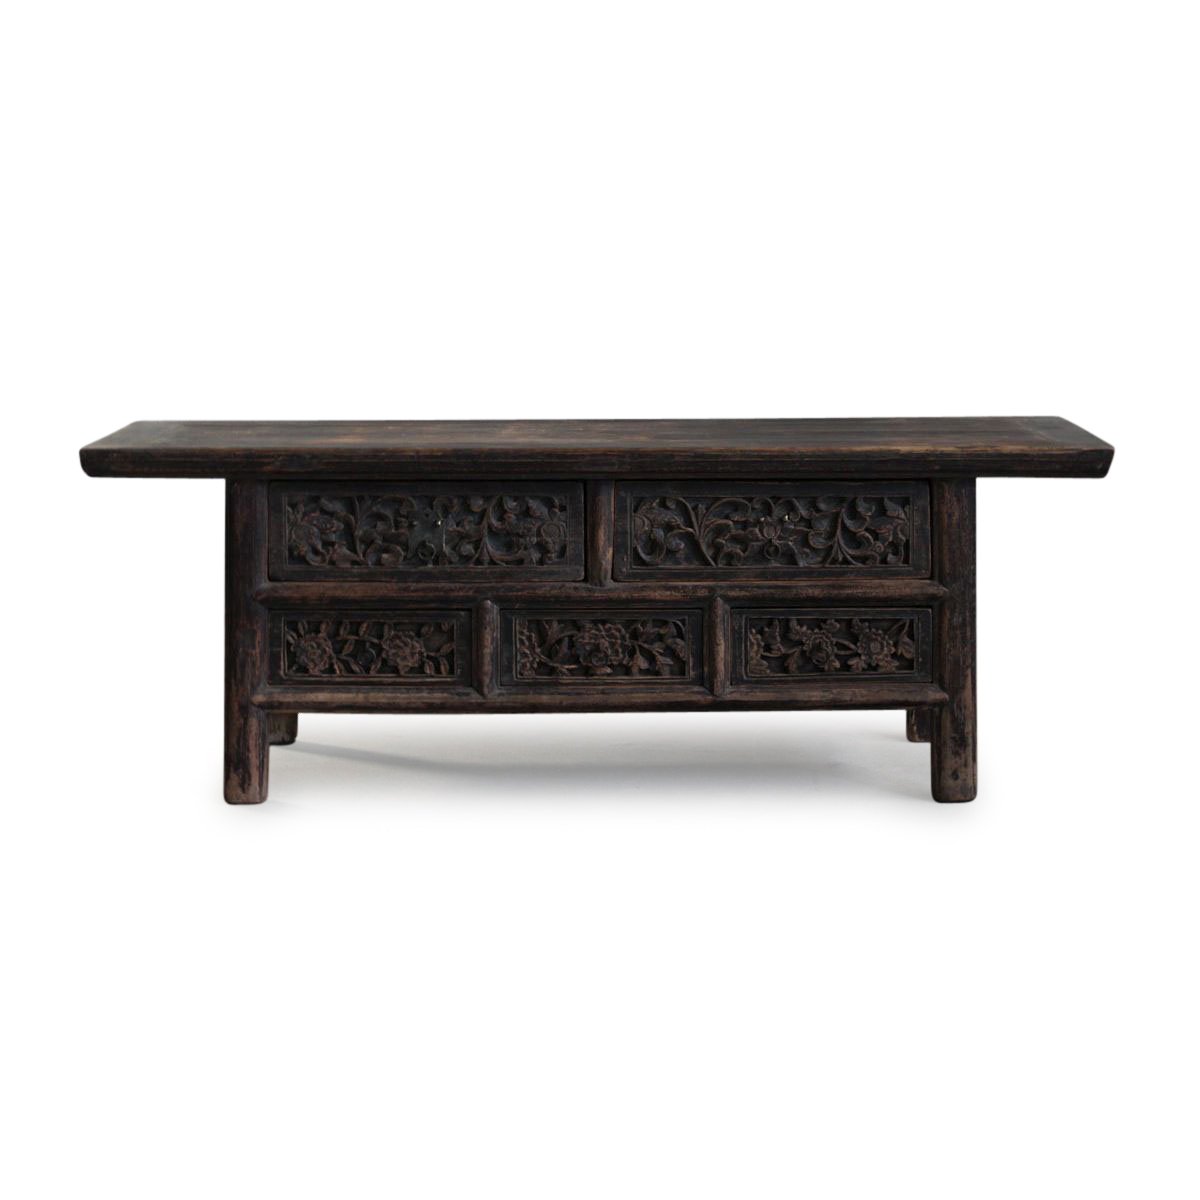 5 Drawer Carved Kang Cabinet From Shanxi - 19thC - 129 x 37 x 45 (wxdxh cms) - C1572